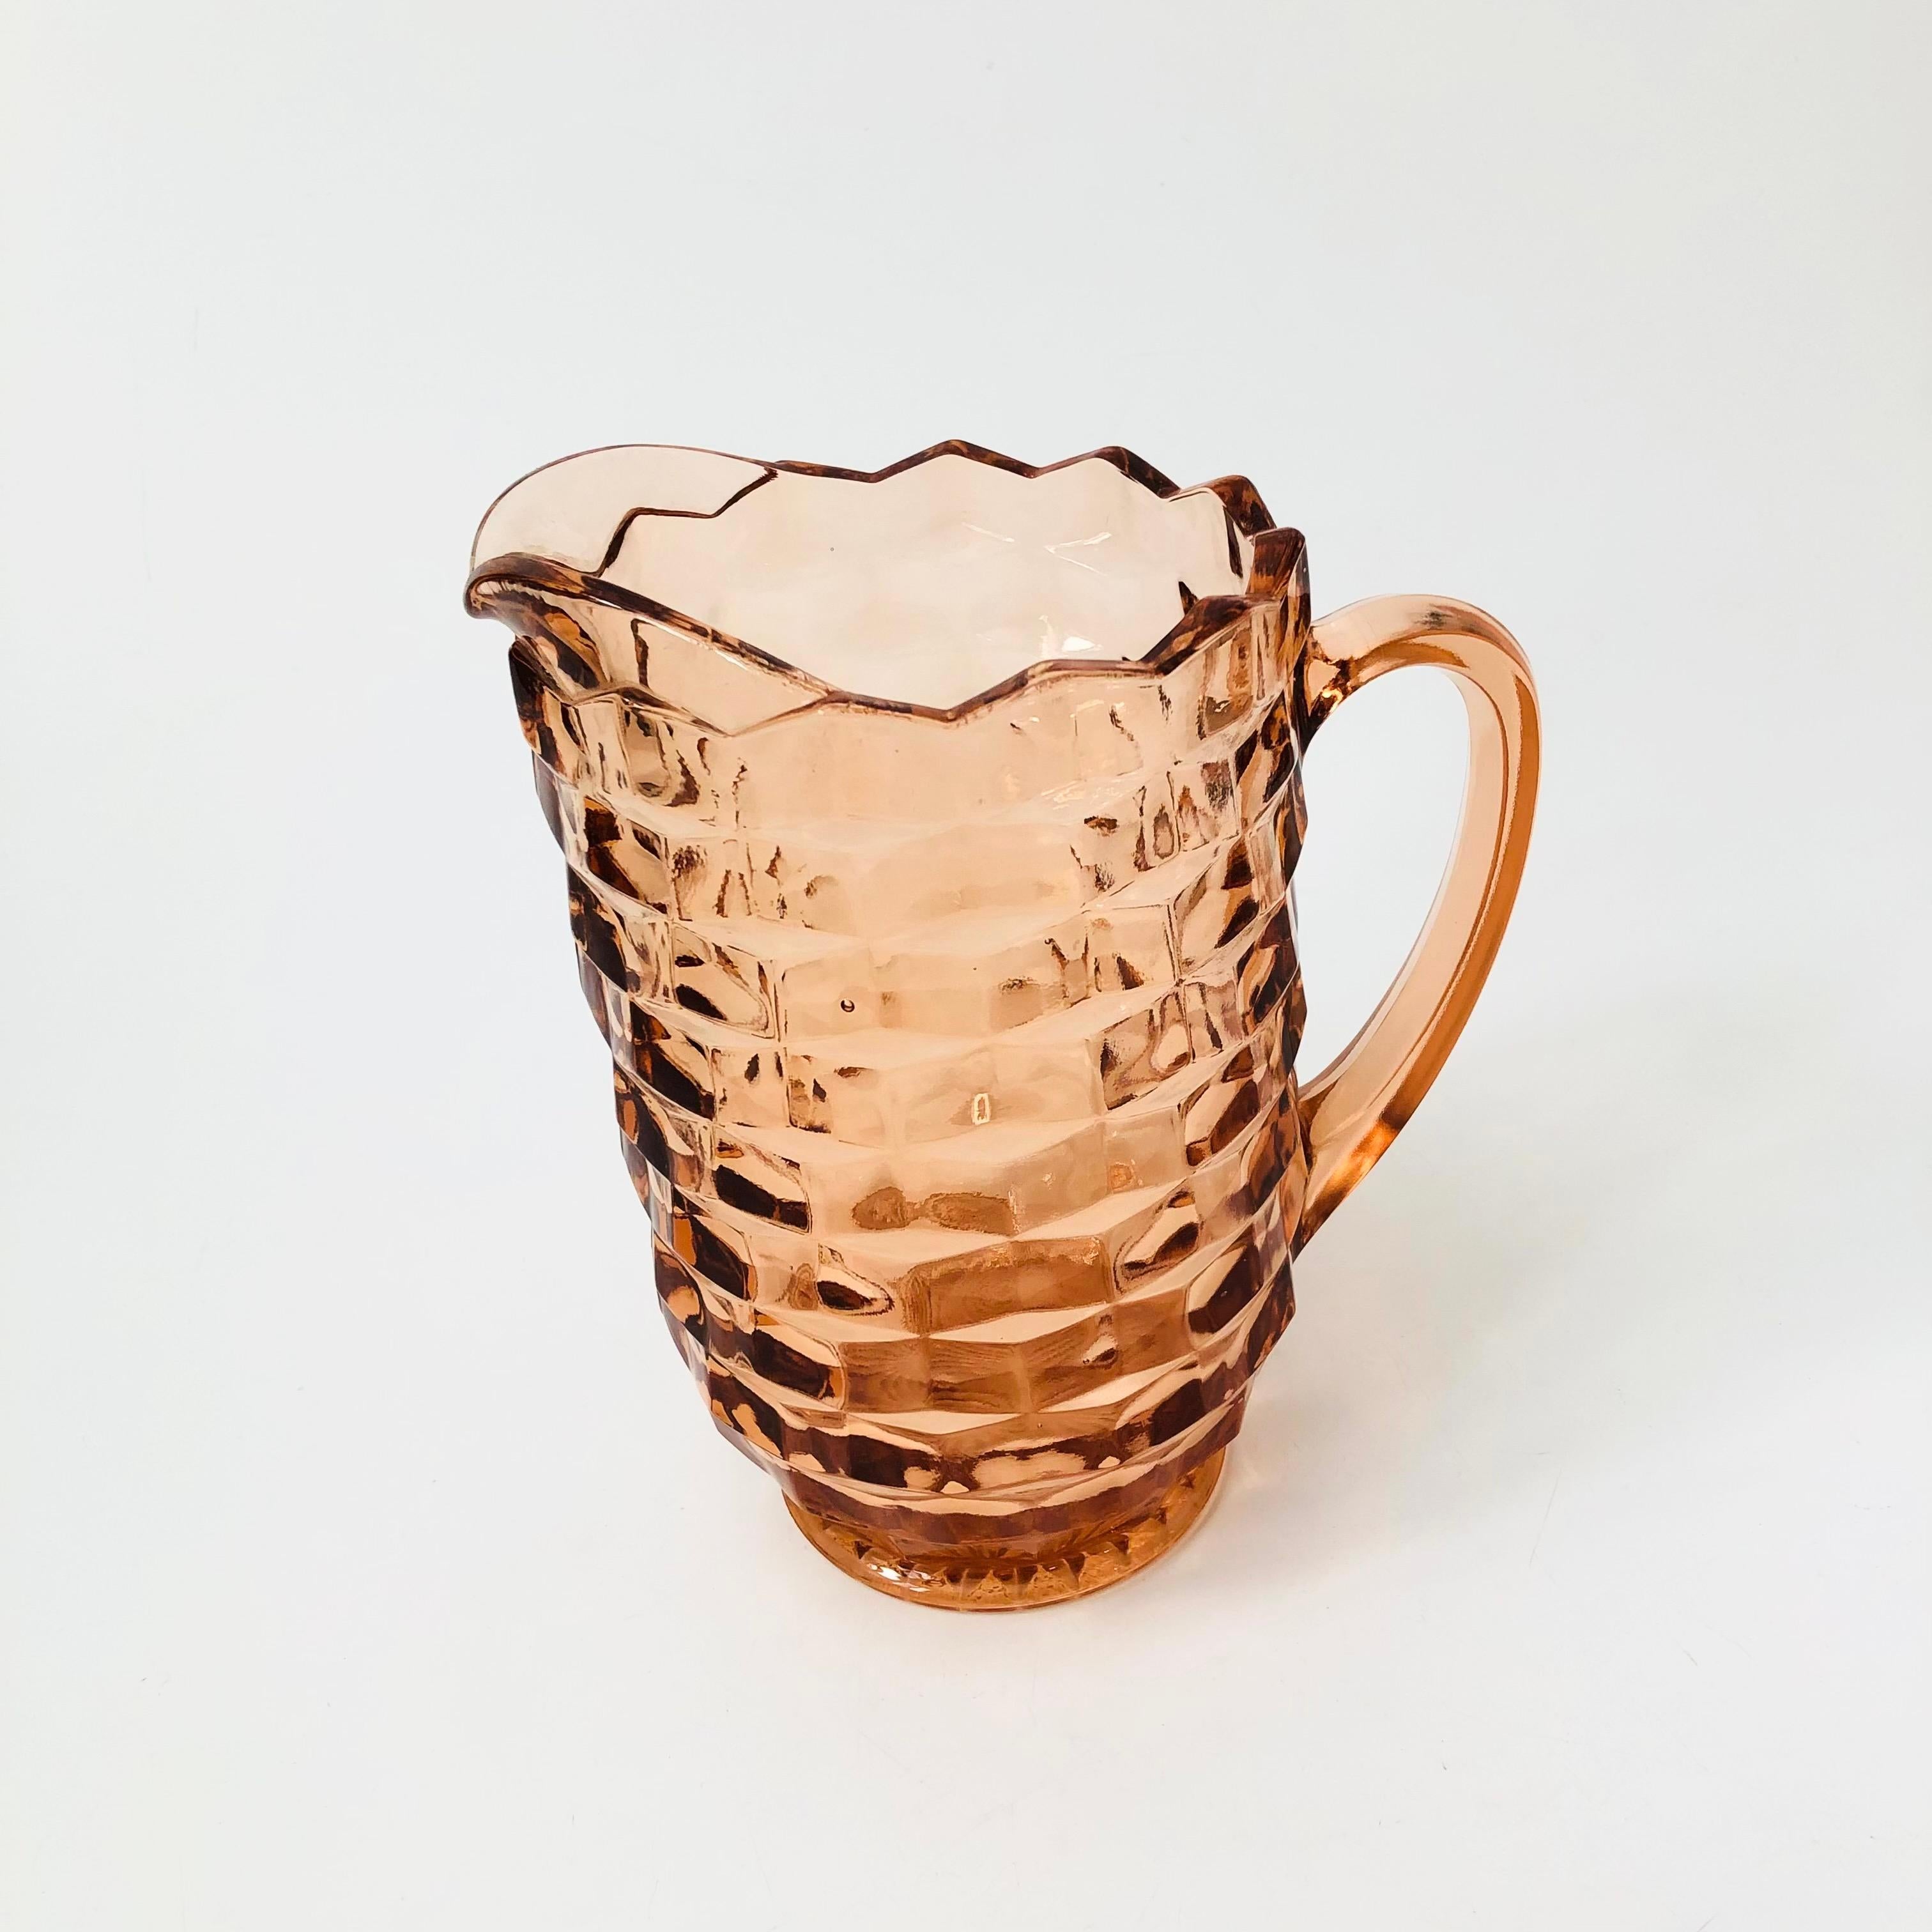 A vintage pitcher in a cubist design in blush pink glass. Made in the Whitehall pattern by Indiana Glass. Smooth interior. Perfect for serving drinks.

